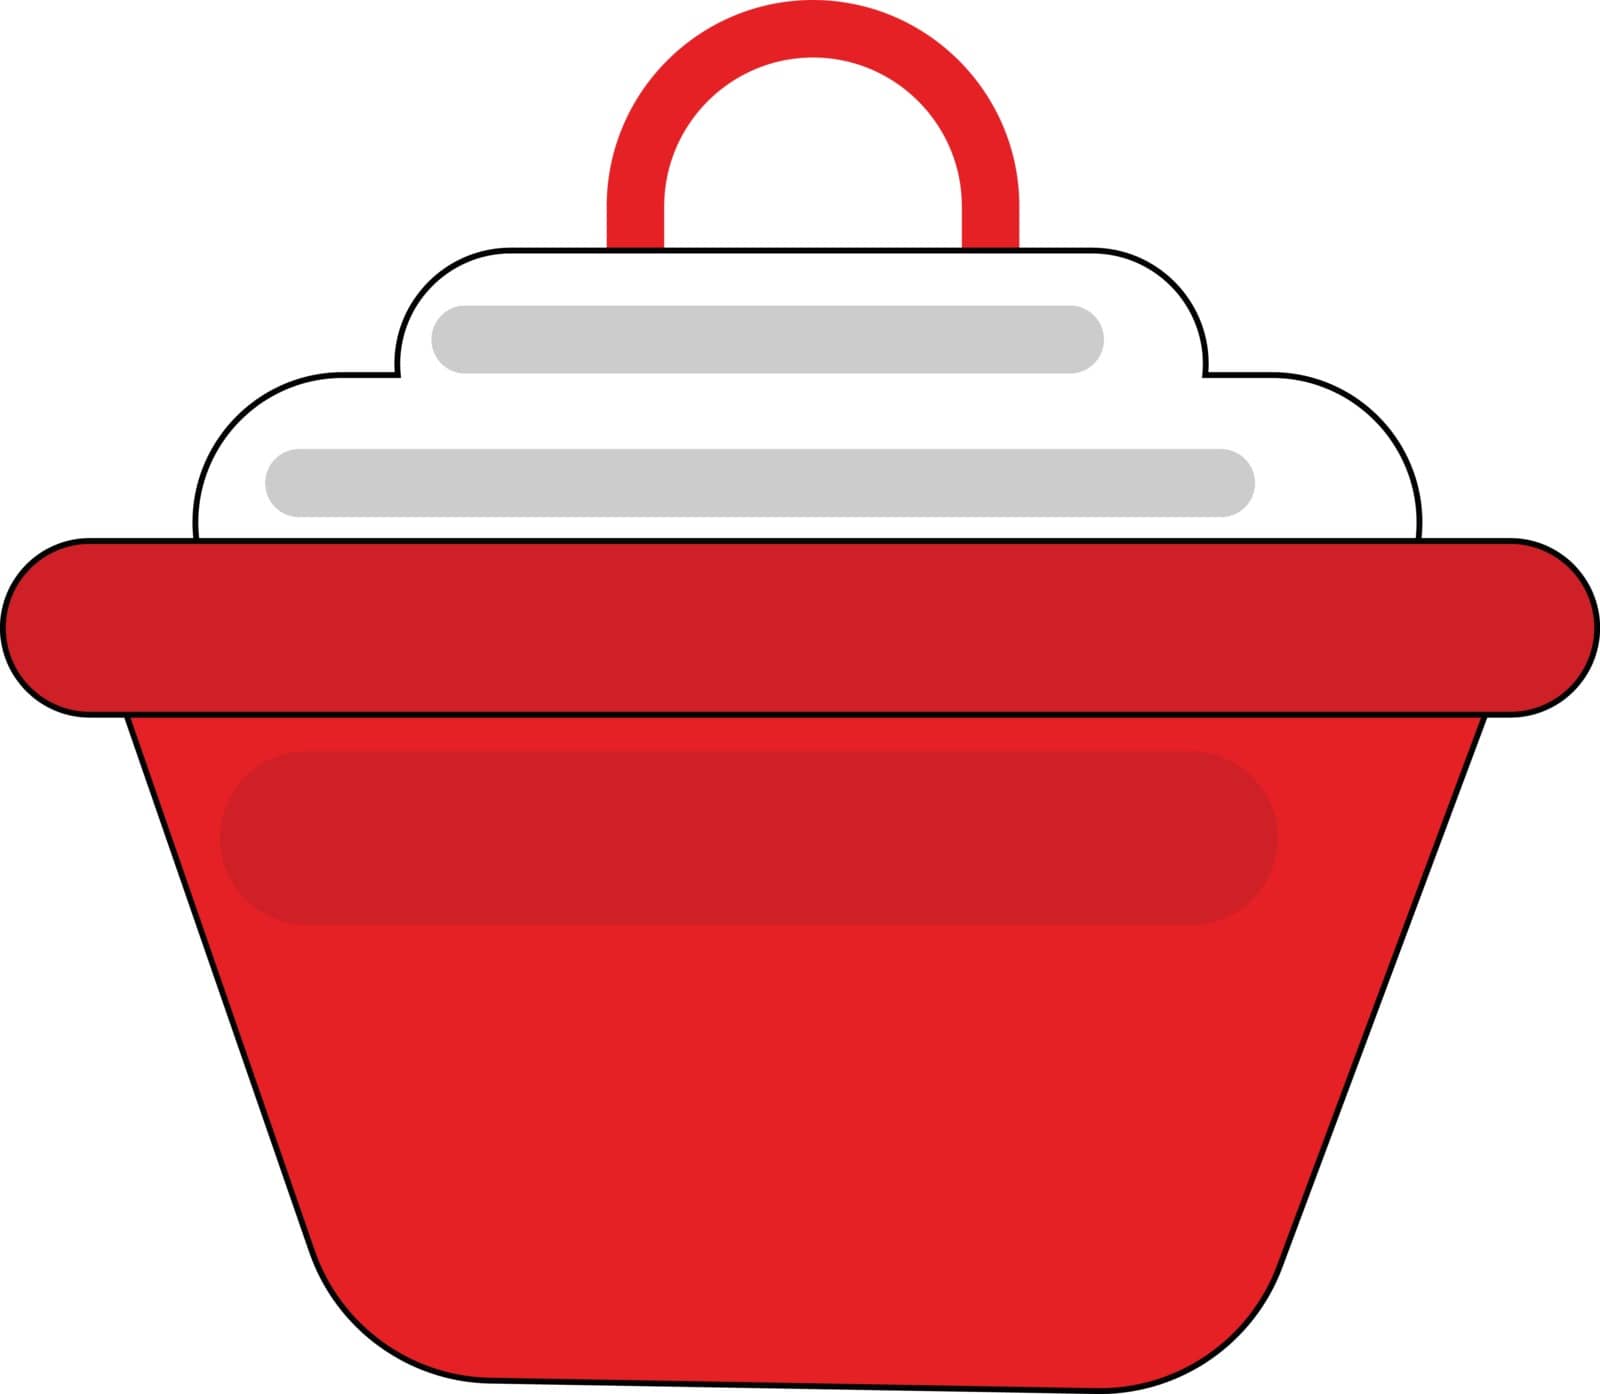 Clipart of a red-colored non-stick saucepan provided with a white lid furnished with a loop rests on the surface  vector  color drawing or illustration